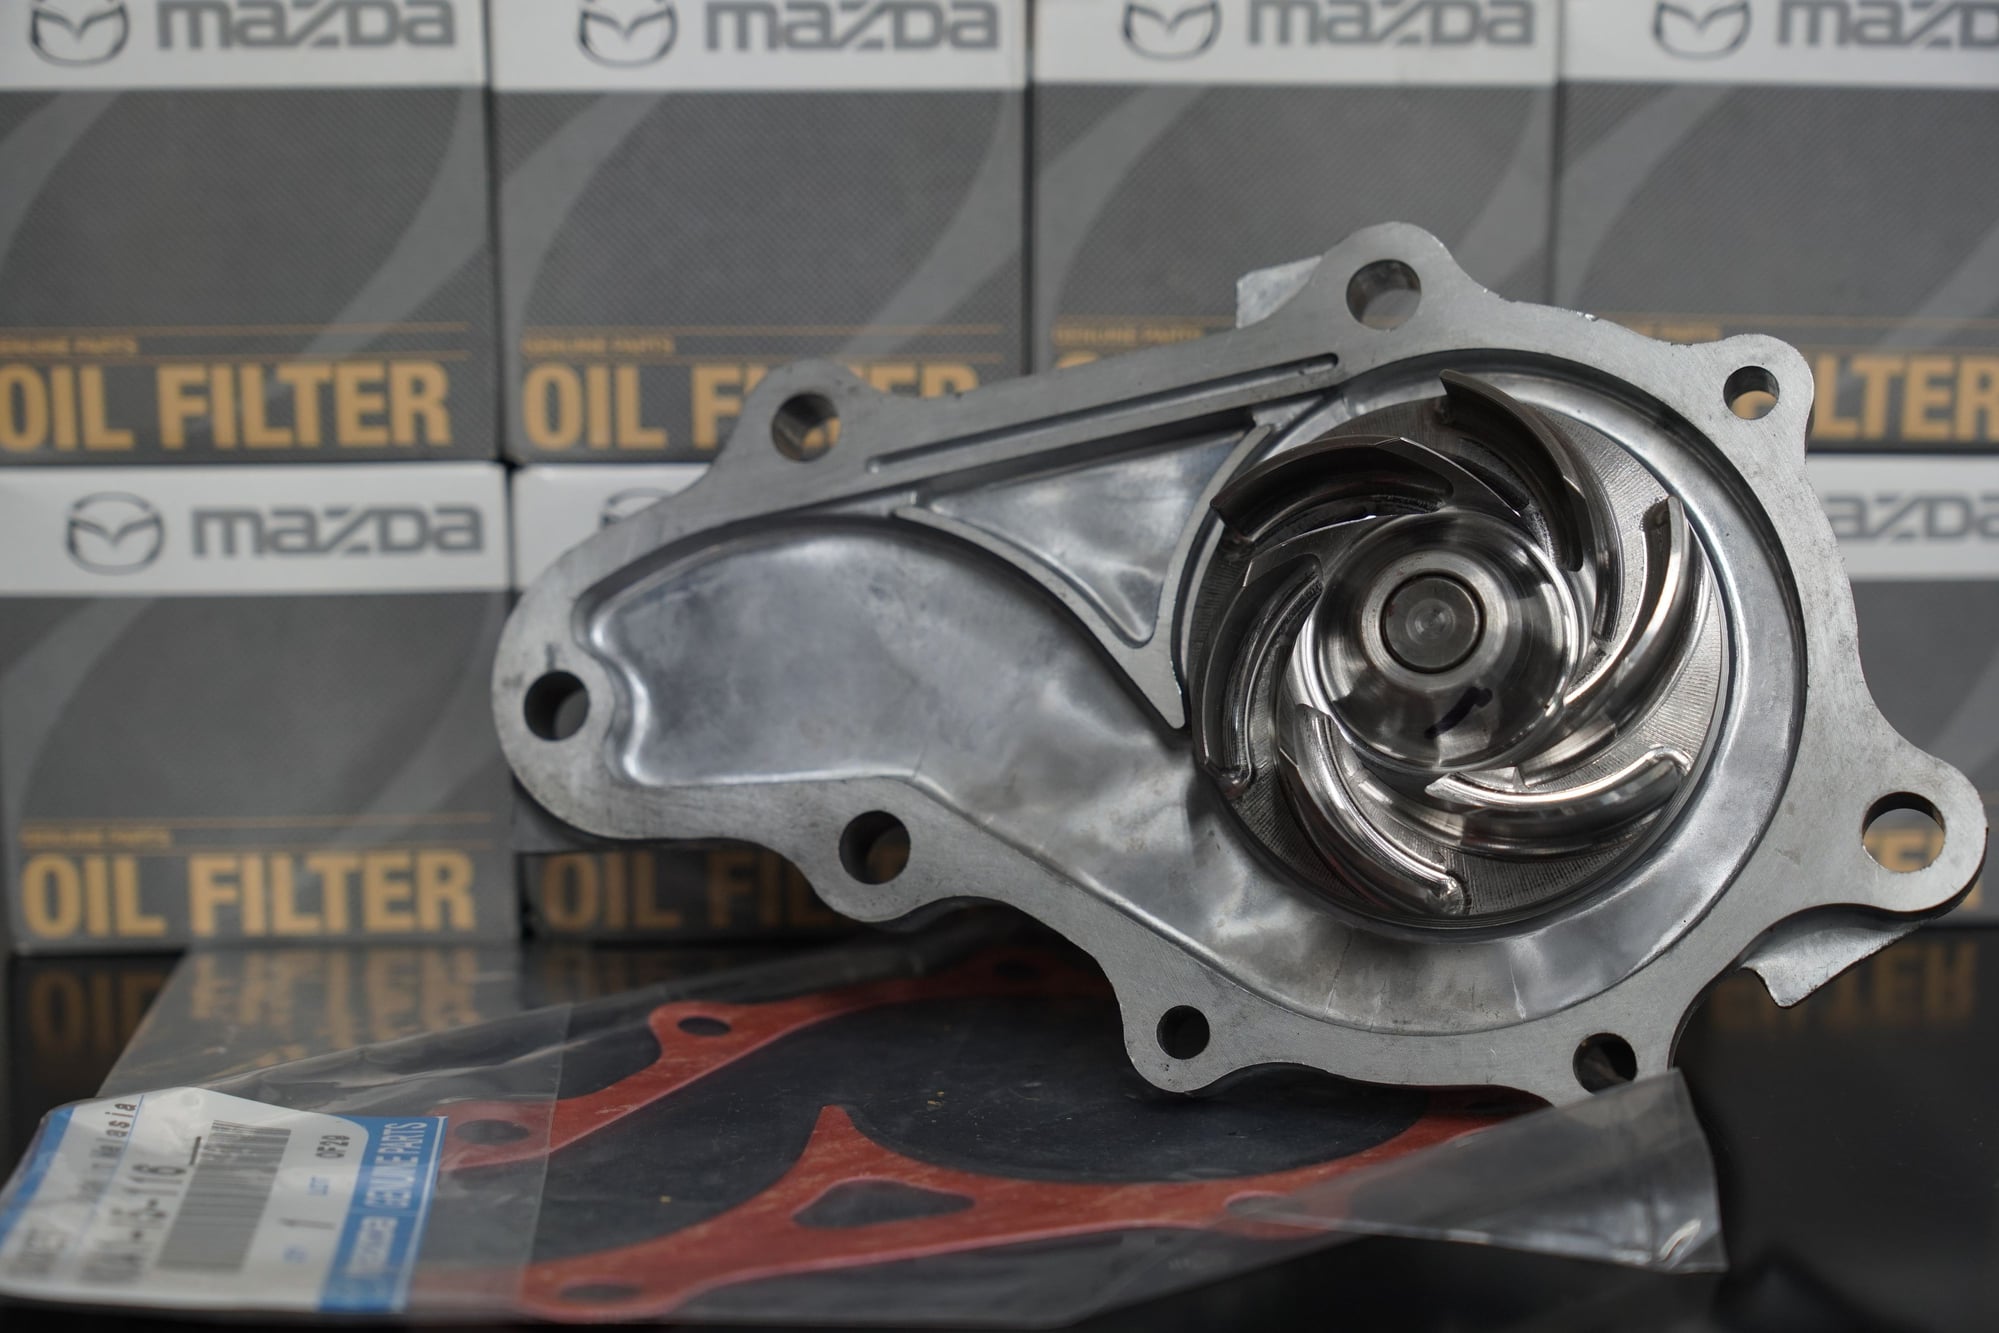 Accessories - BNIB RE-medy High Flow Water Pump - New - 1993 to 2002 Mazda RX-7 - Chicago, IL 60605, United States